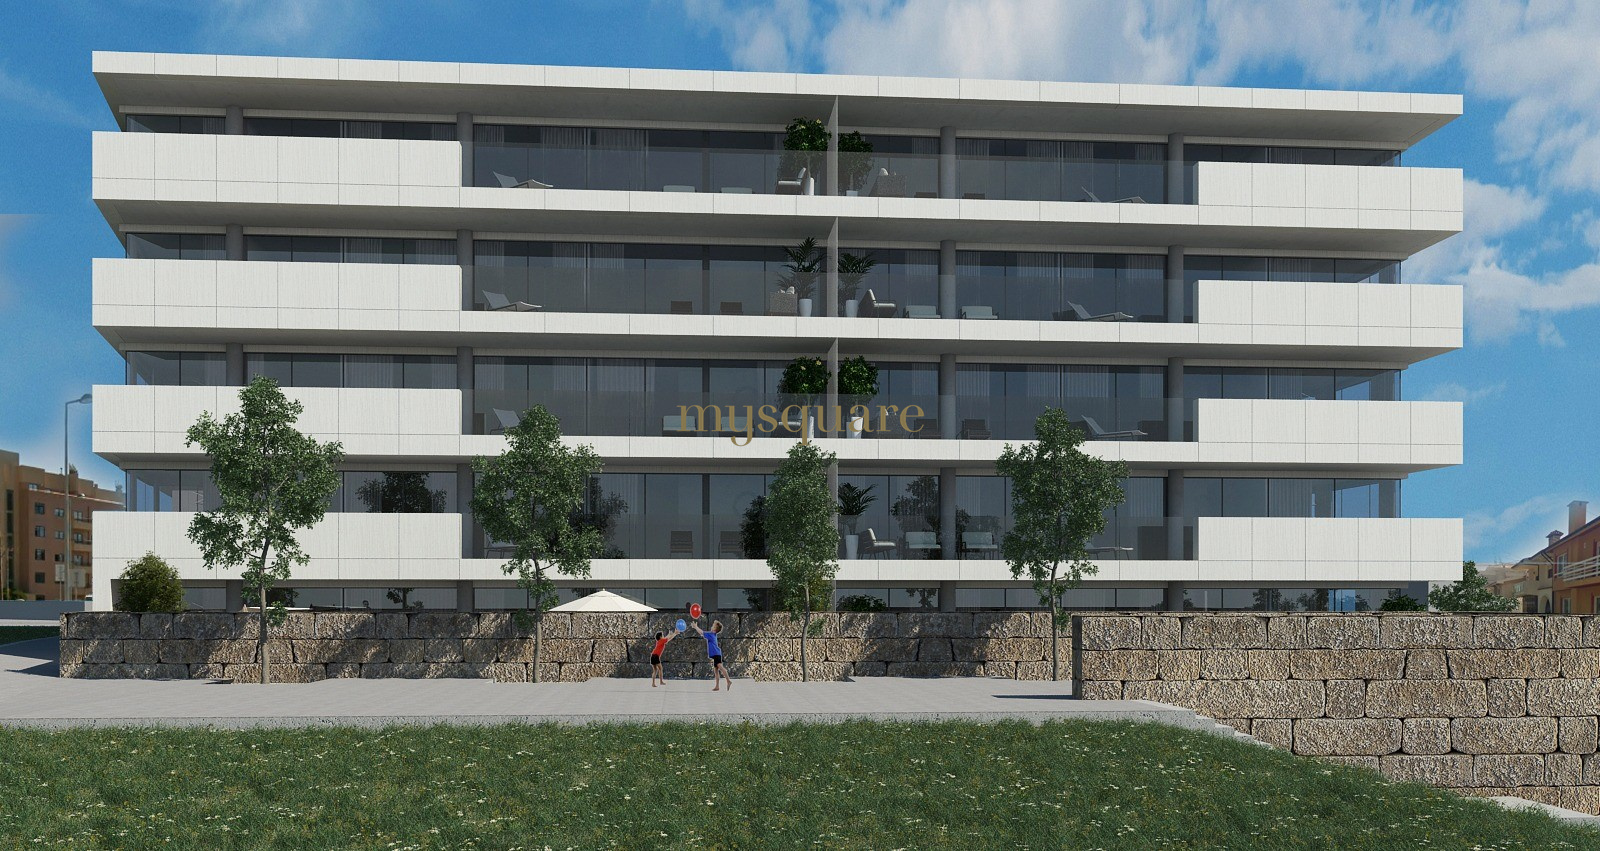 Luxury 4 bedroom apartment under construction - Canidelo, Gaia